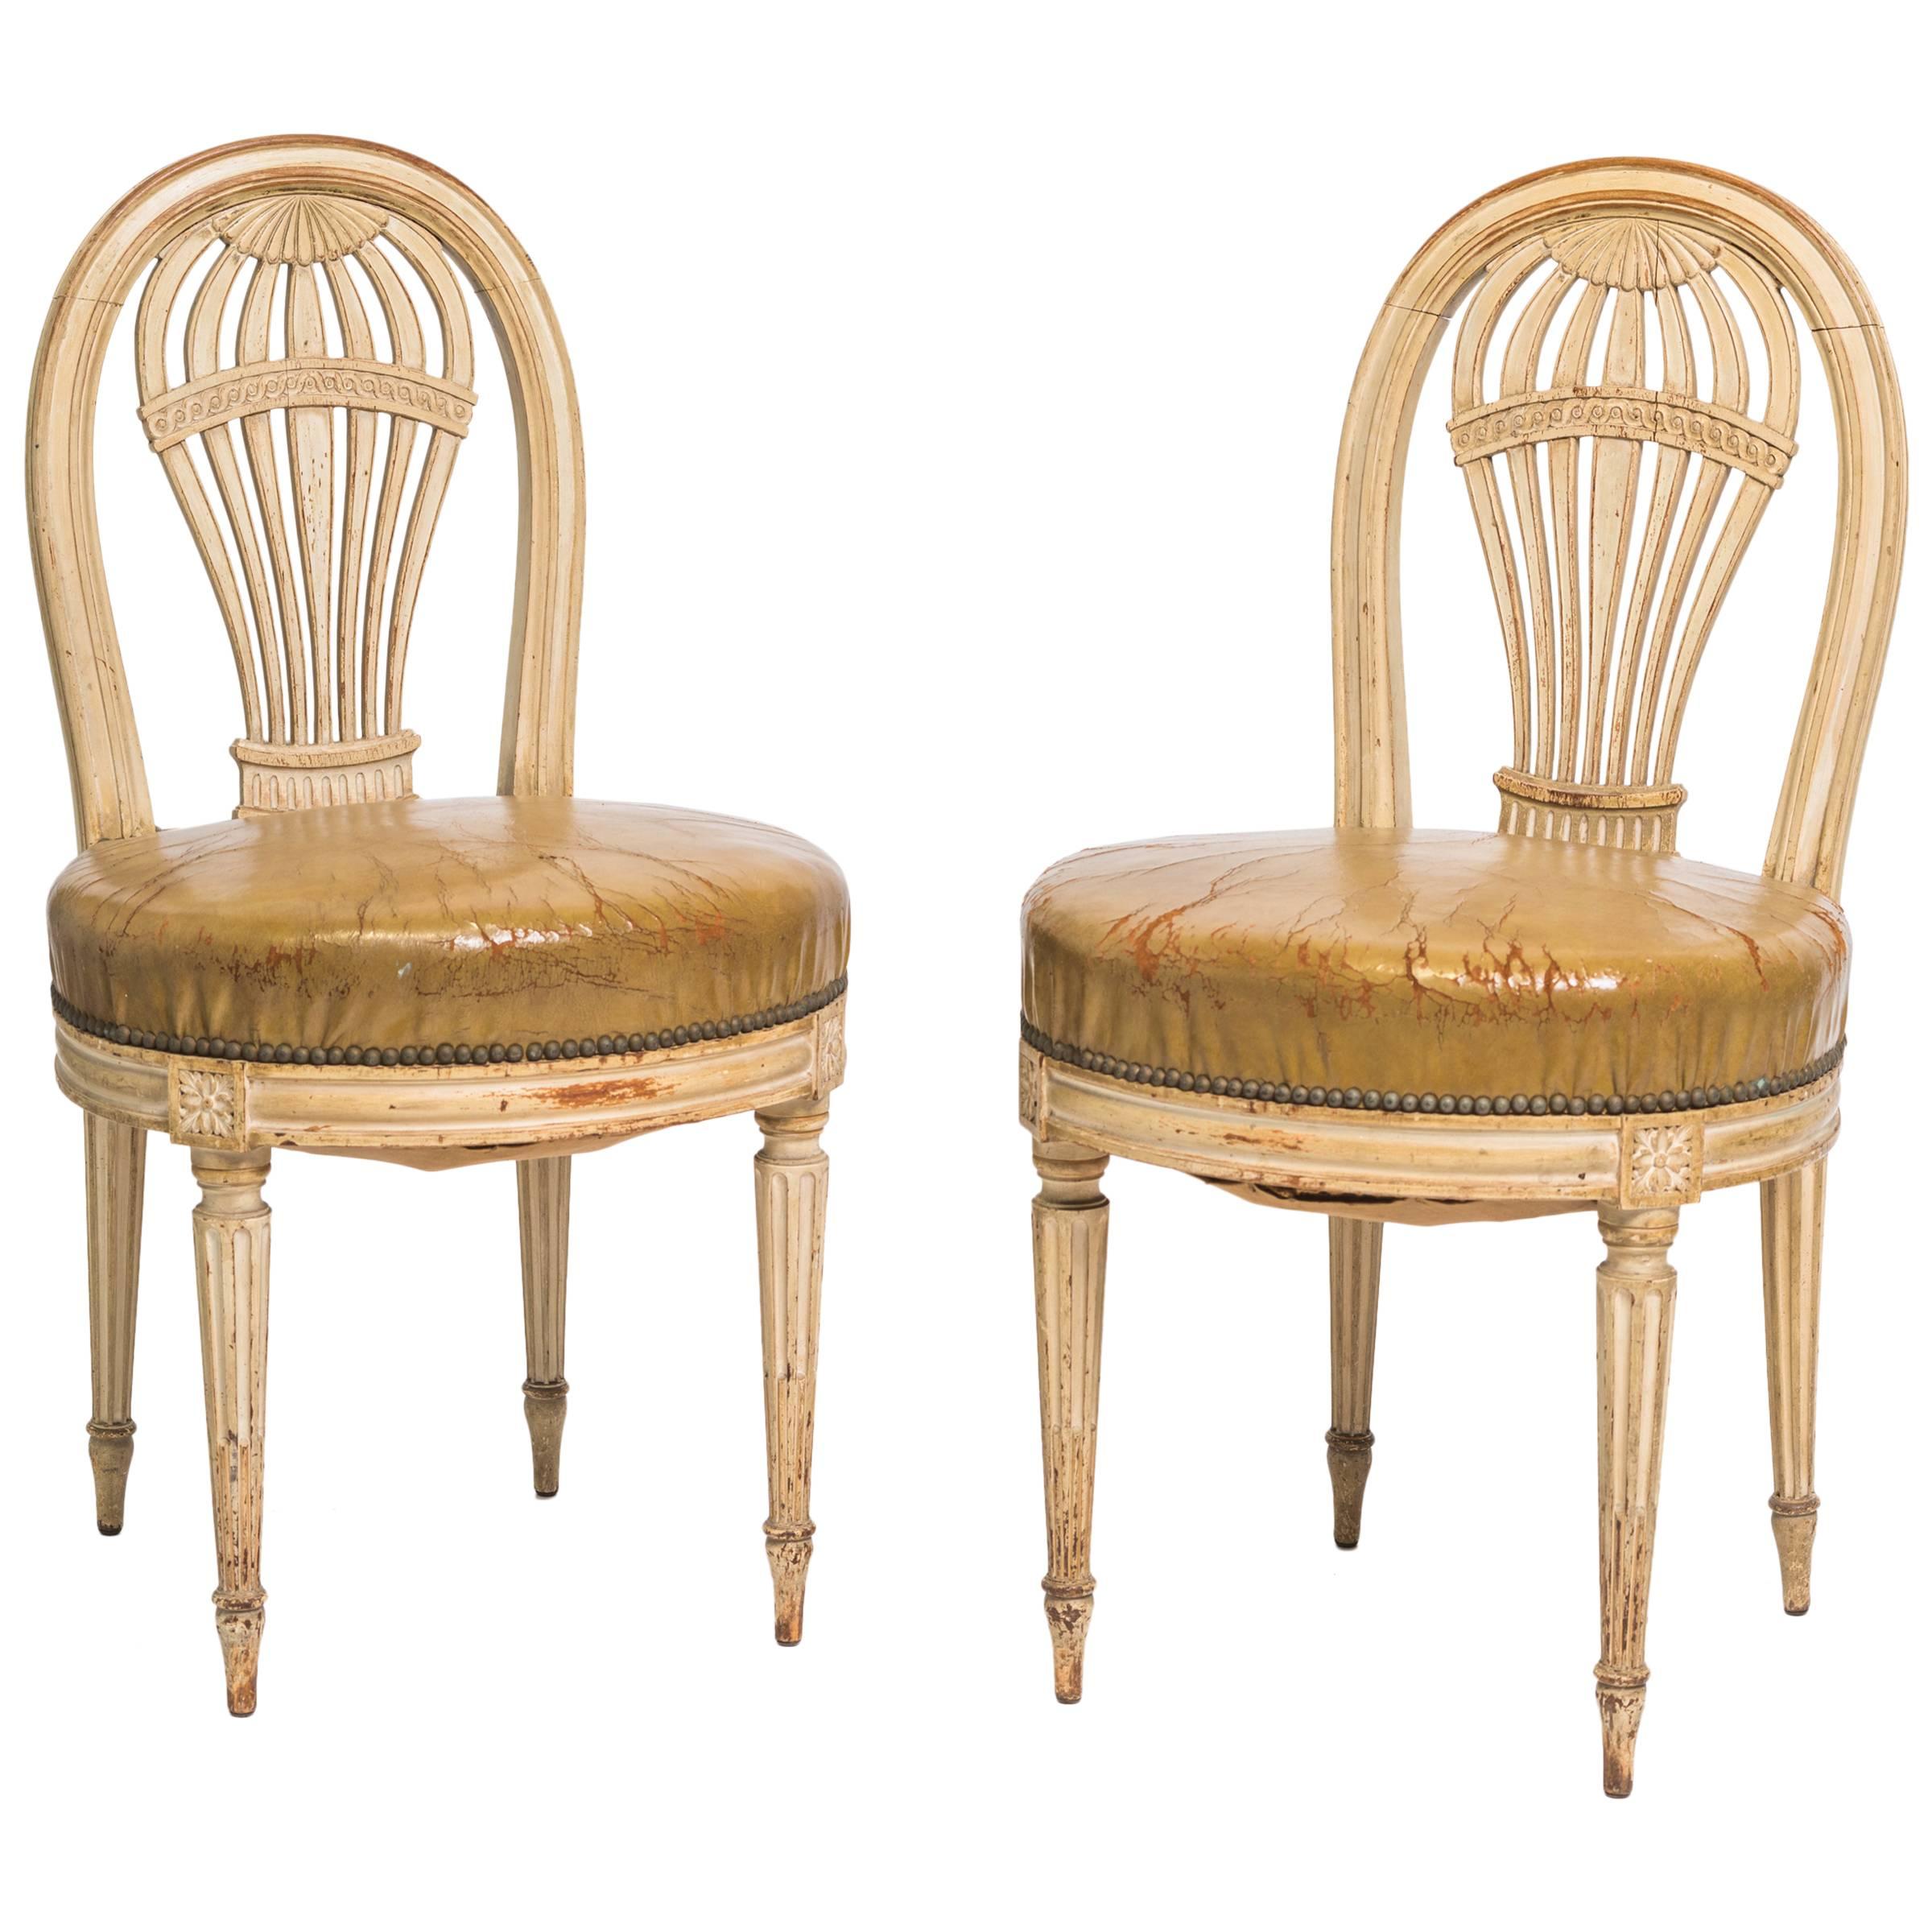 Pair of 1920s French Hot Air Balloon Side Chairs